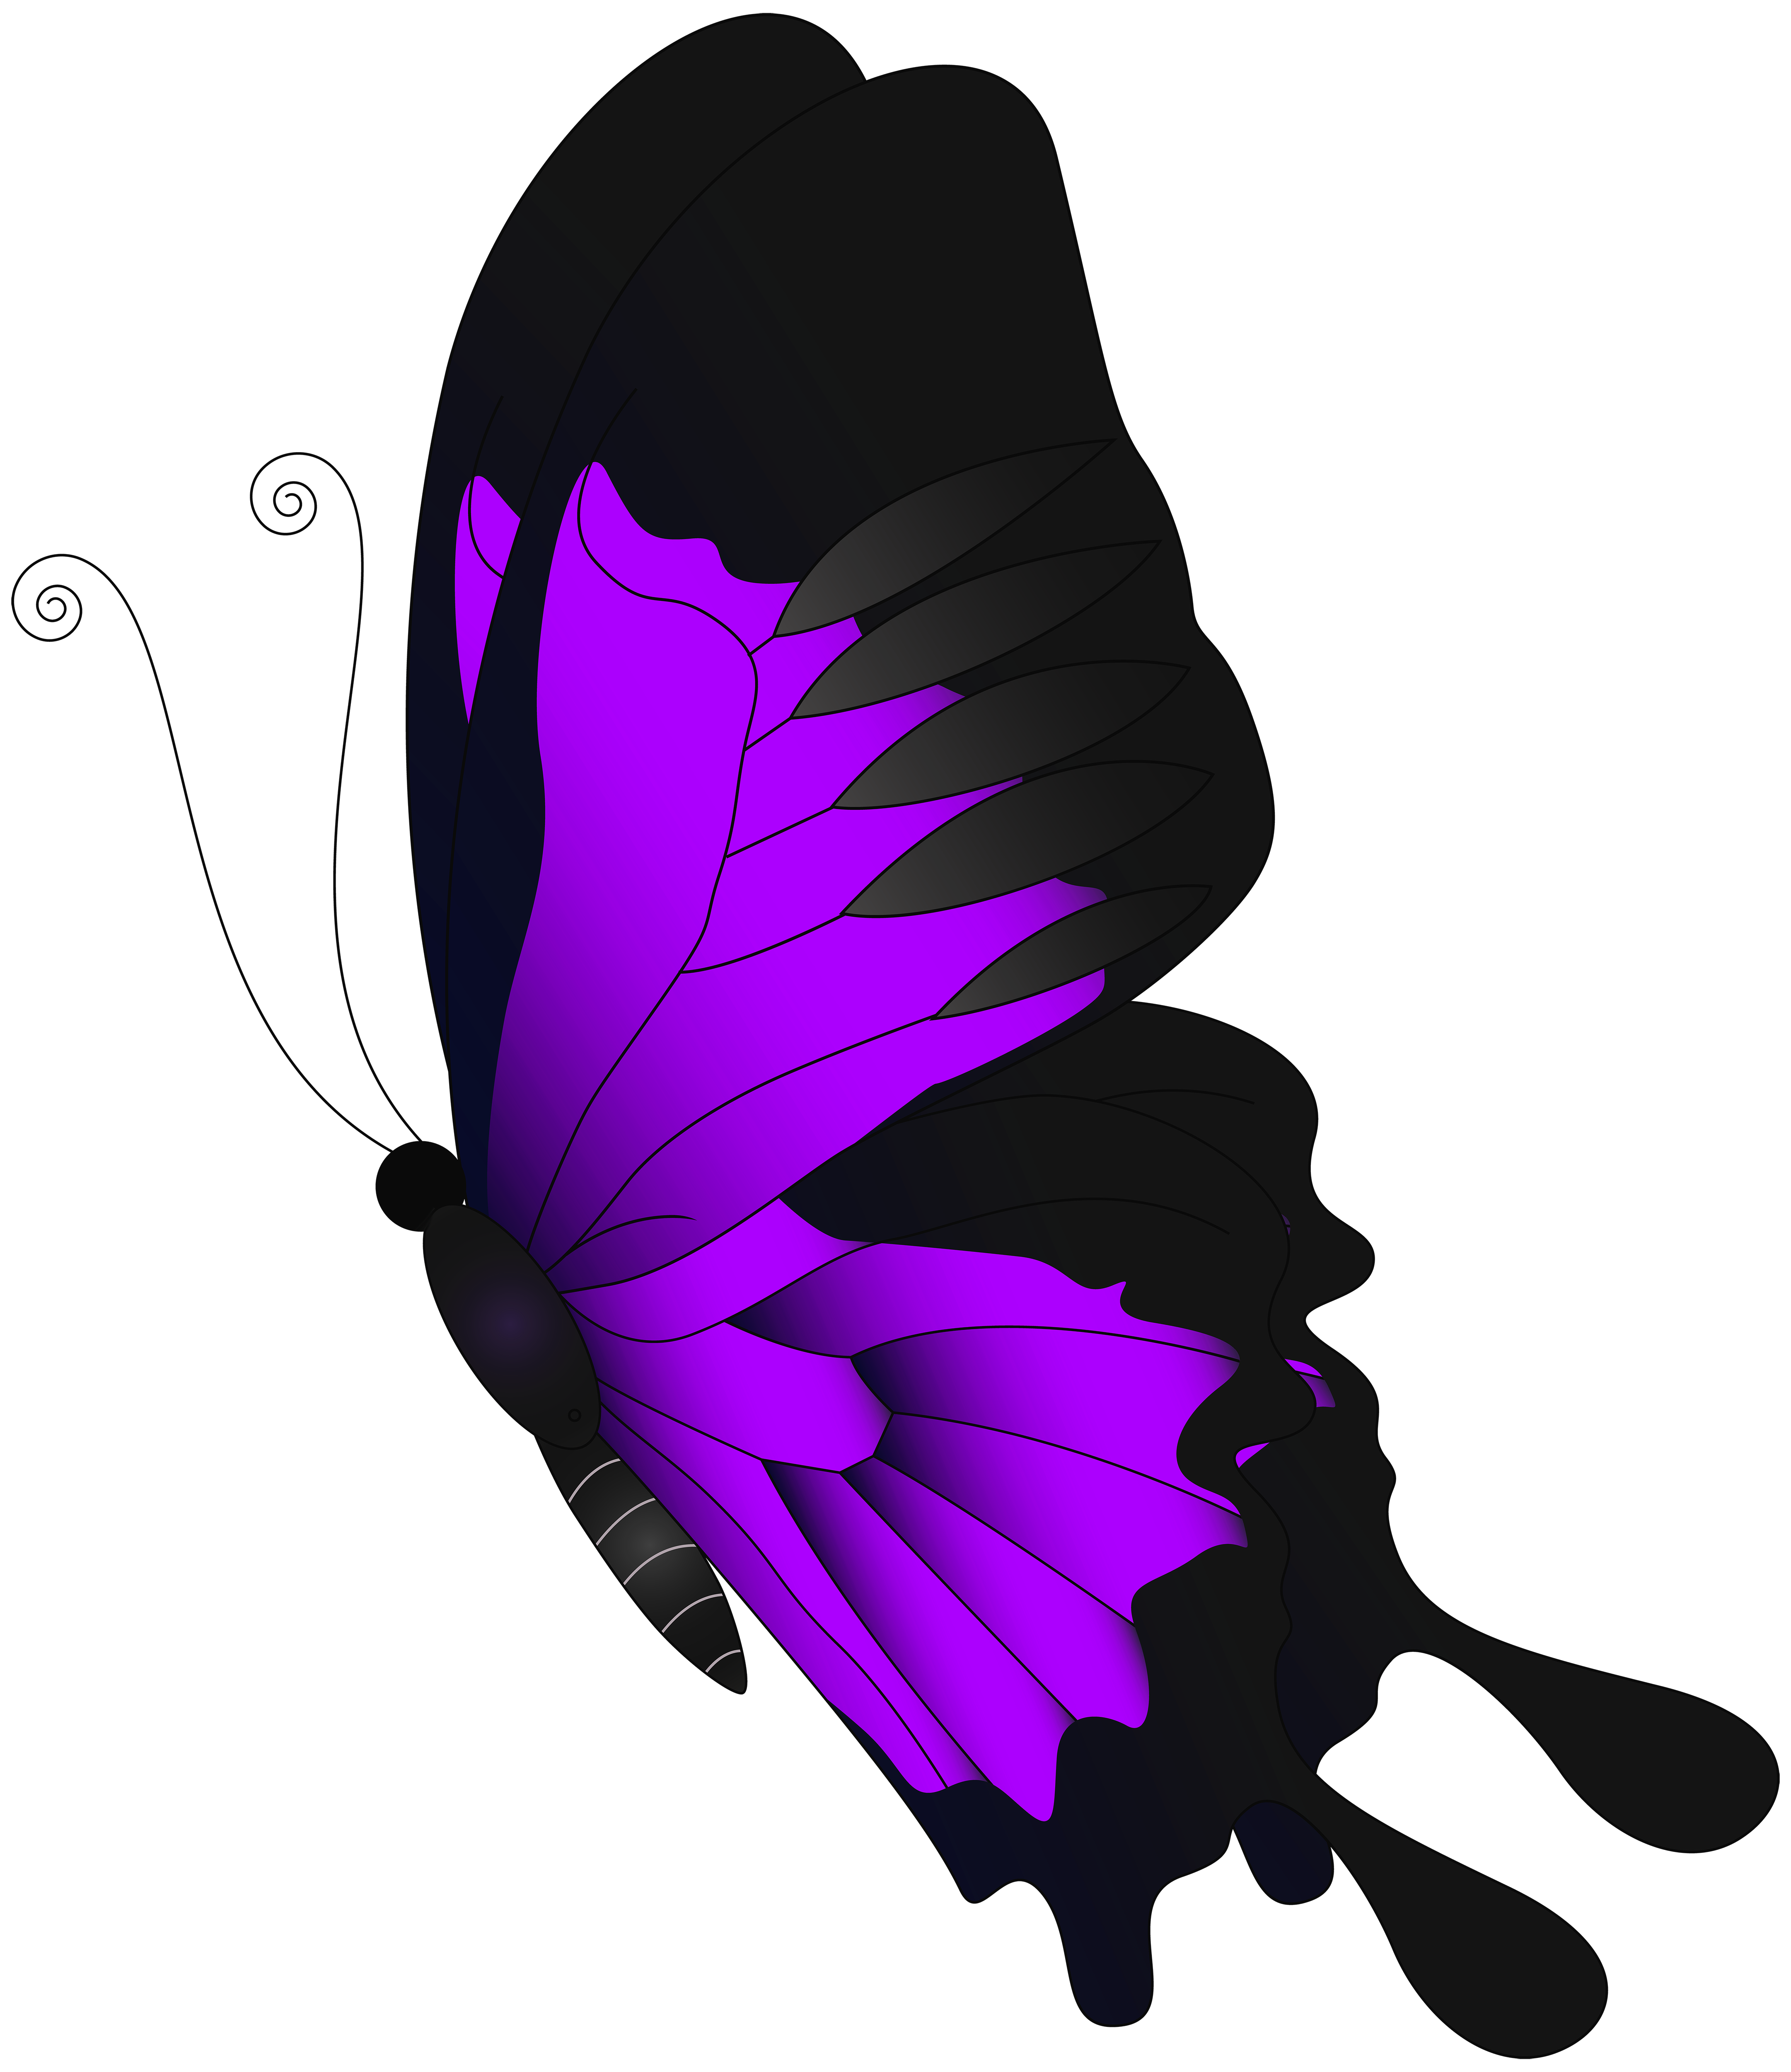 insects clipart purple